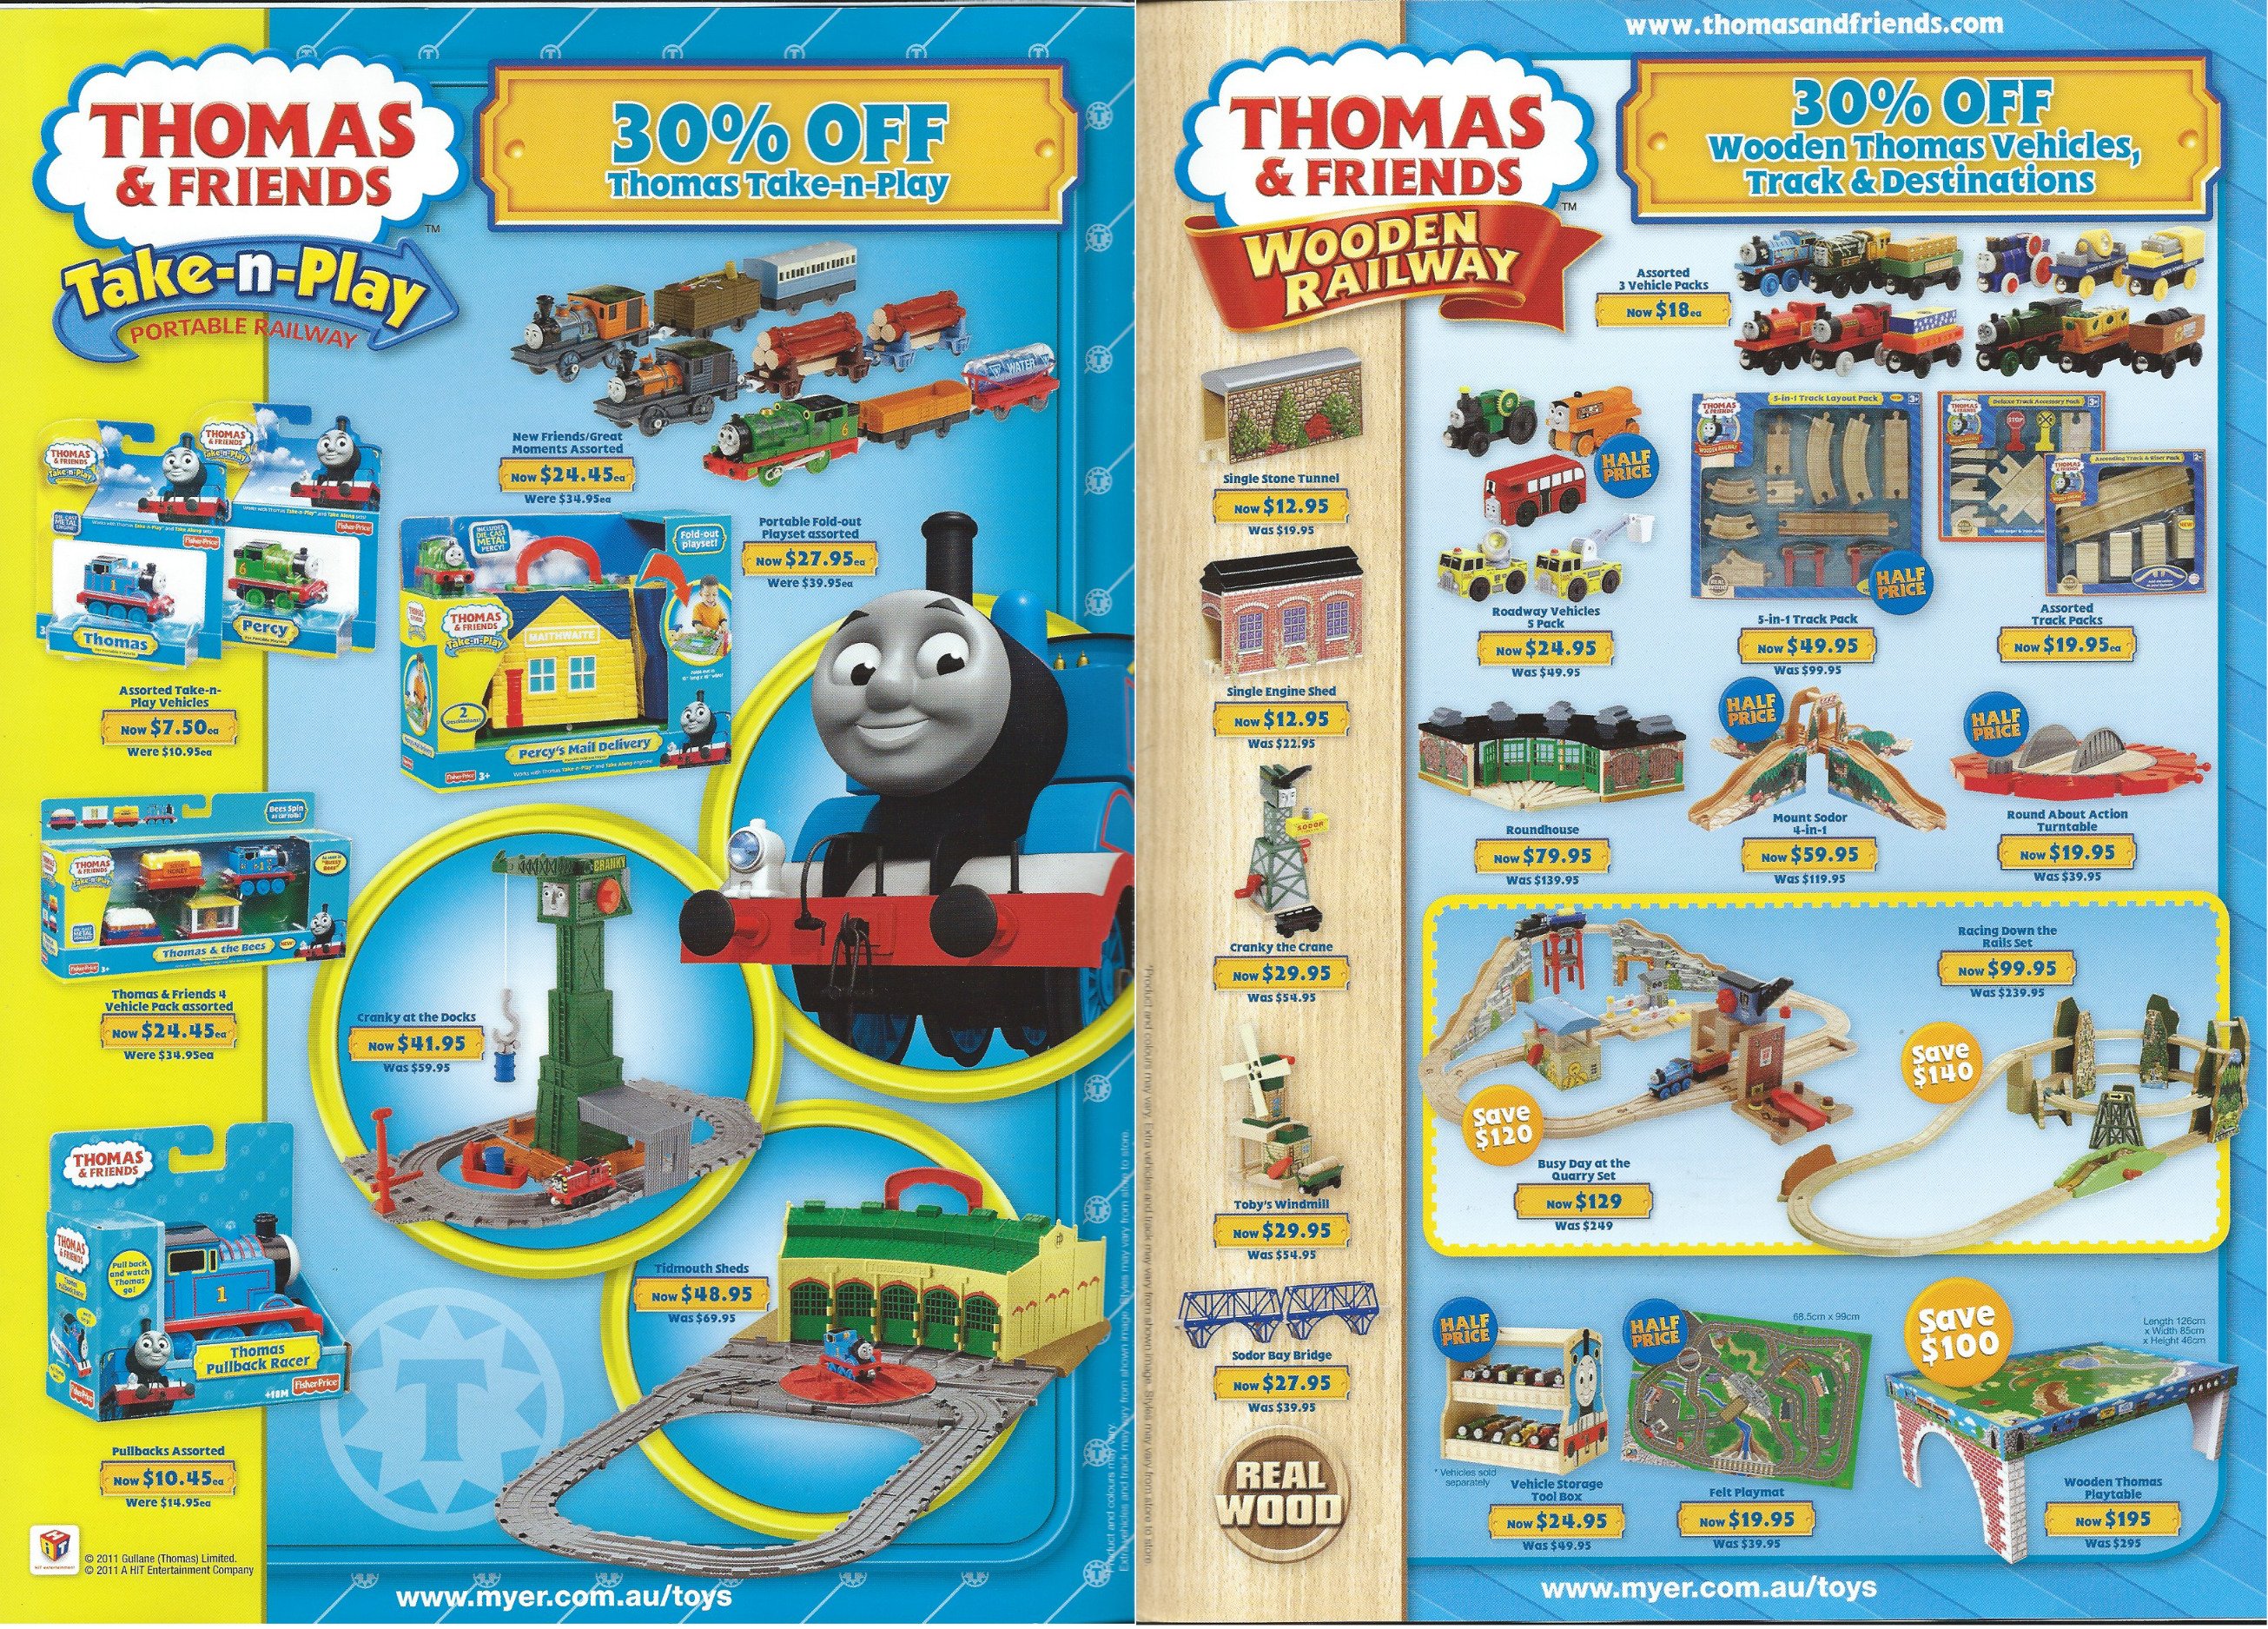 ᴅᴏɢᴄᴀɴ't on X: 2011 Myer catalogue featuring Thomas and